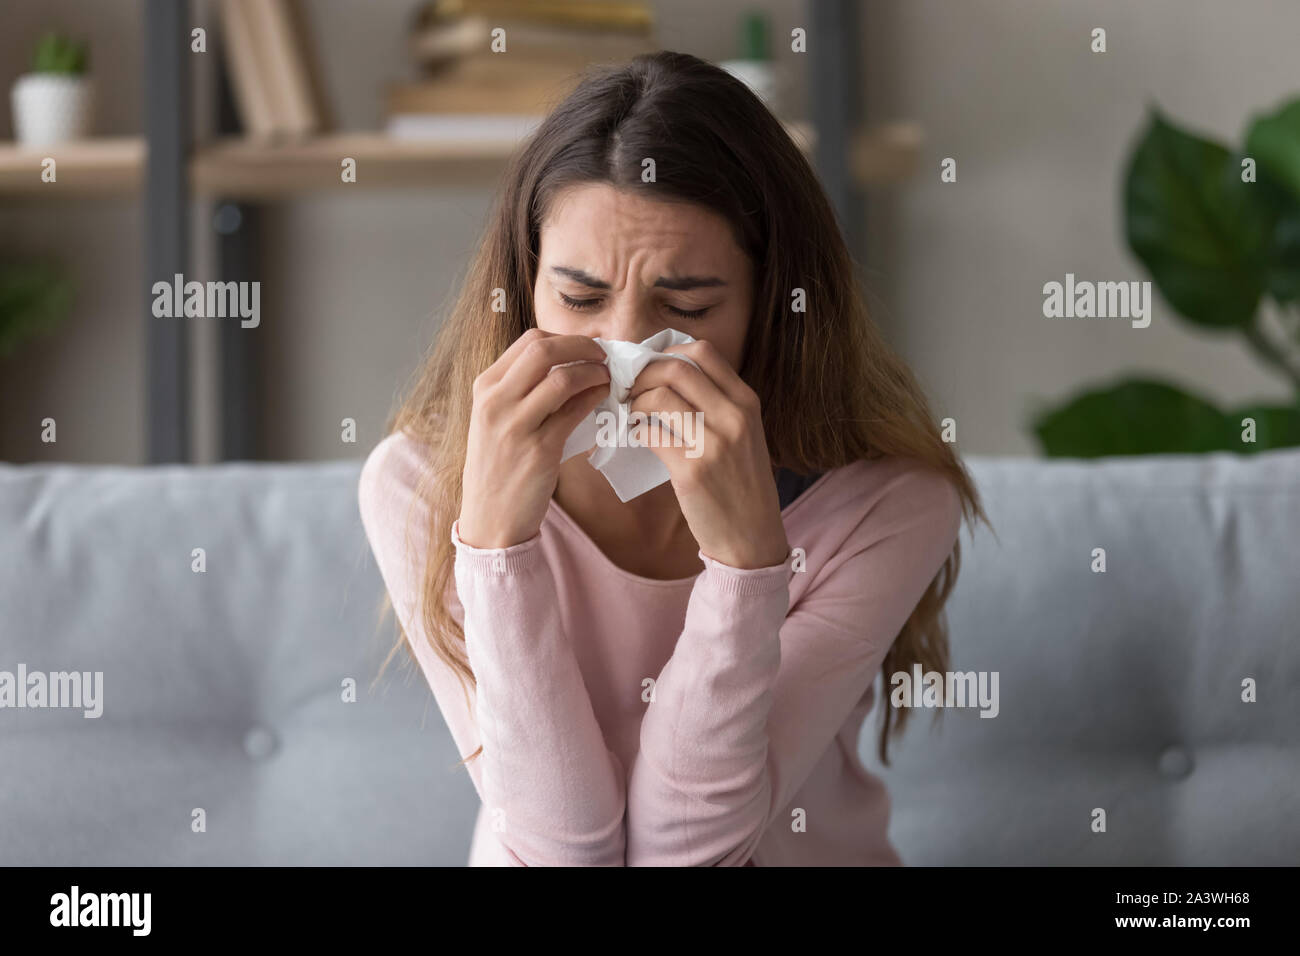 Allergic ill woman holding tissue blowing running nose Stock Photo